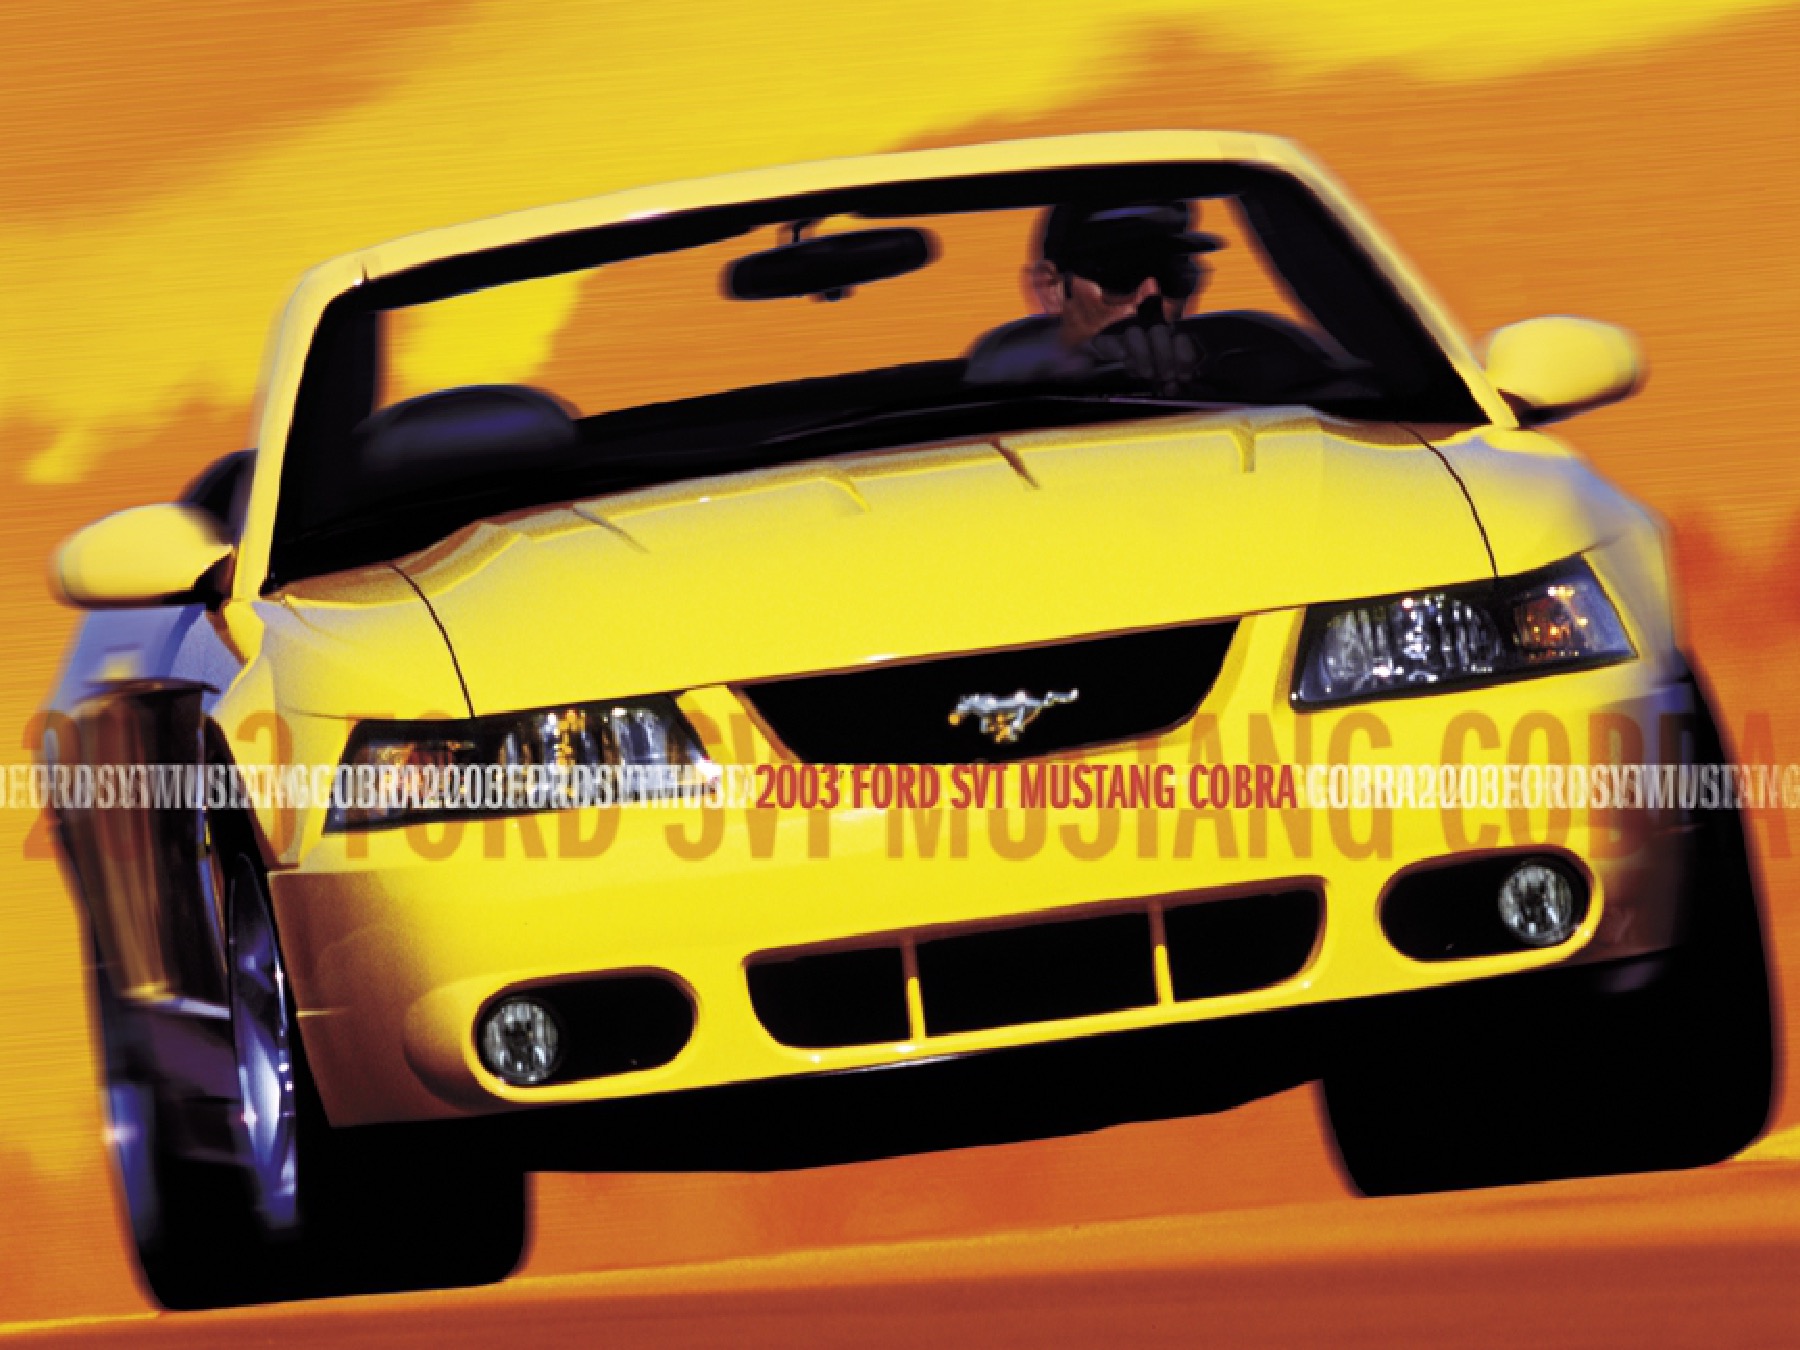 2003 Ford Mustang Cobra Brochure Page 13